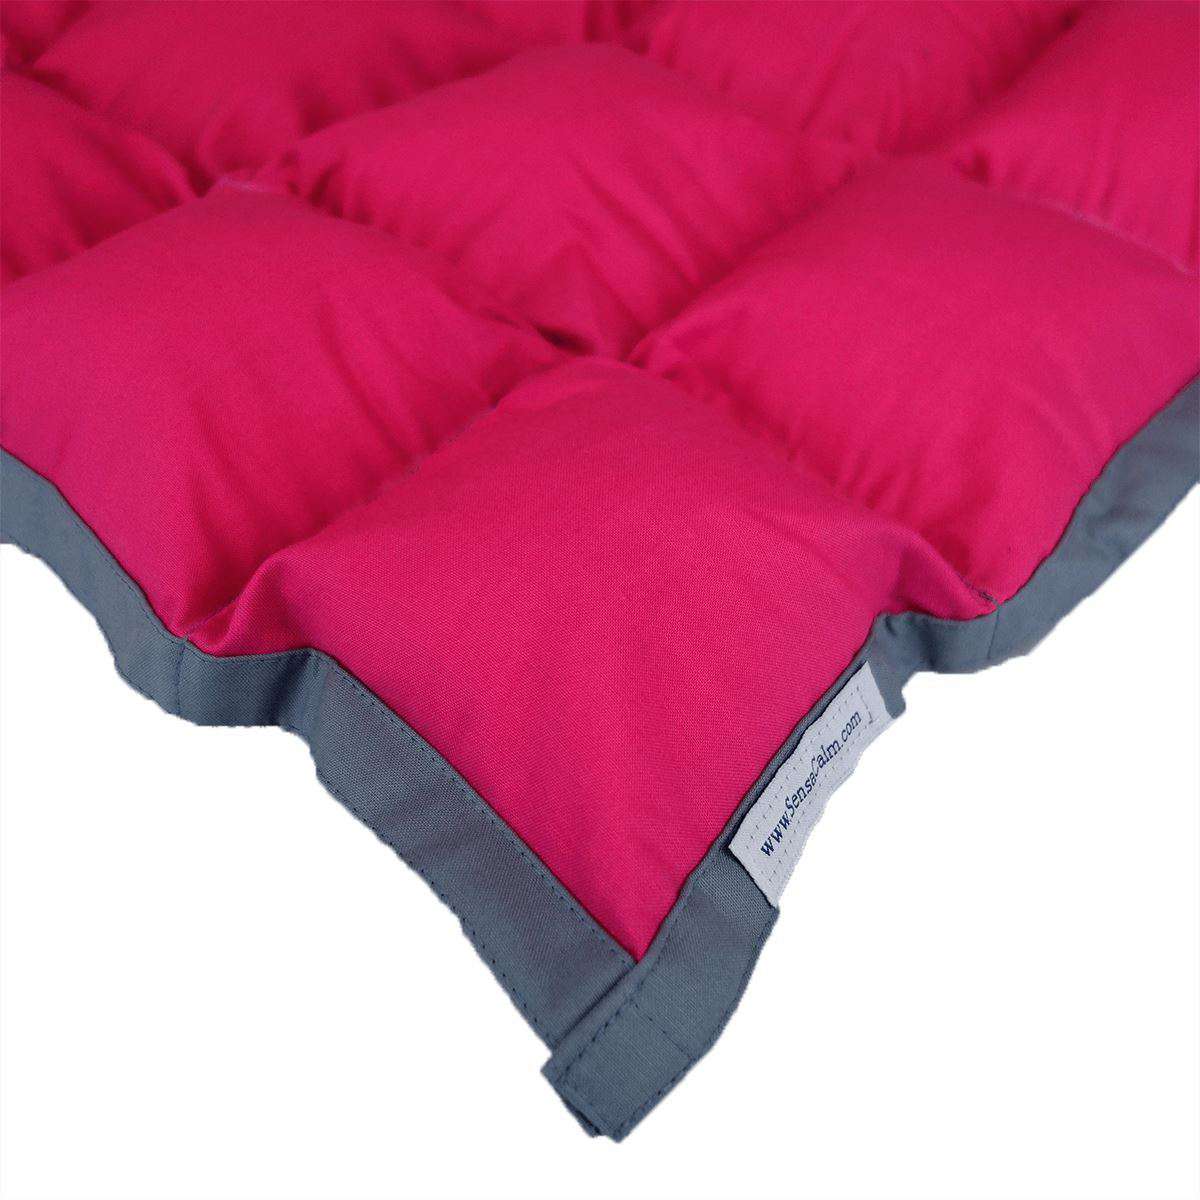 Clearance Weighted Blanket - Small 8 lb Raspberry and Volcanic Gray (for 70 lb user) MULTIPLES AVAILABLE